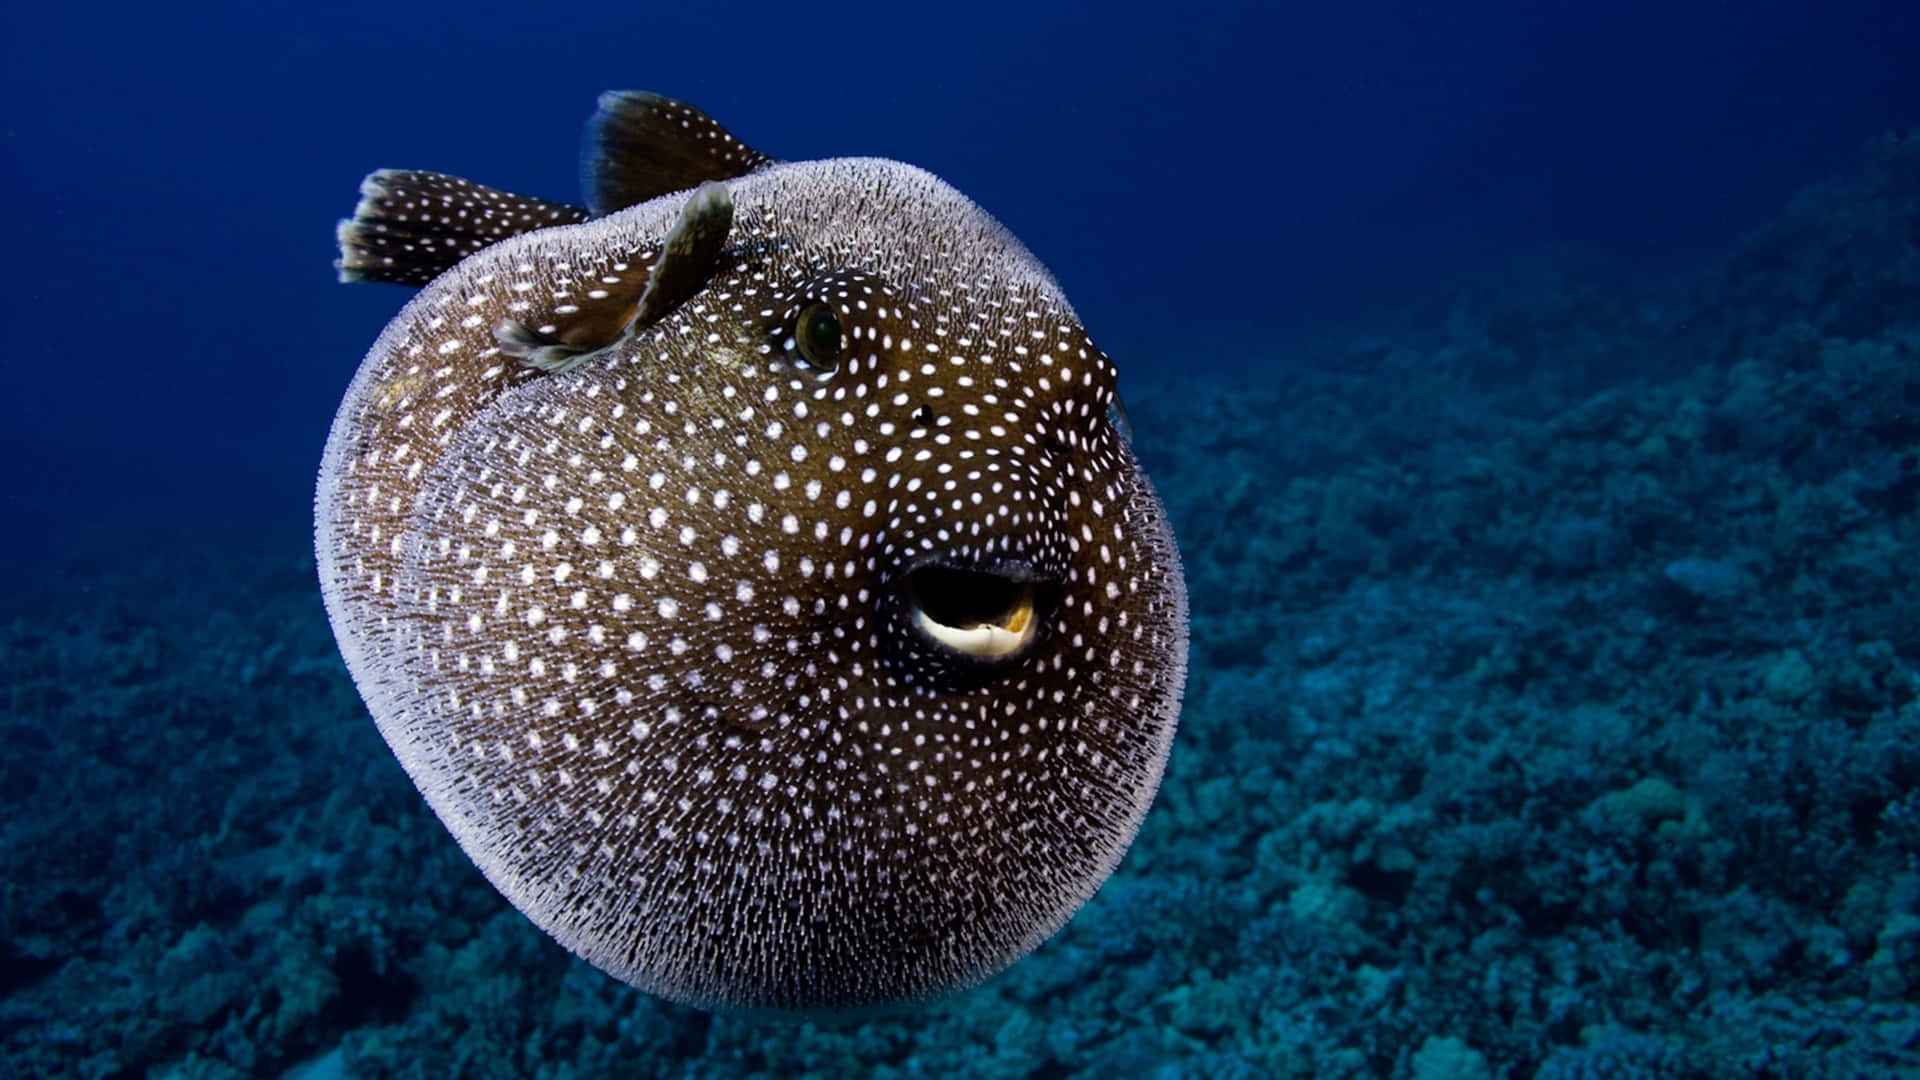 Inflated Spotted Pufferfish Underwater